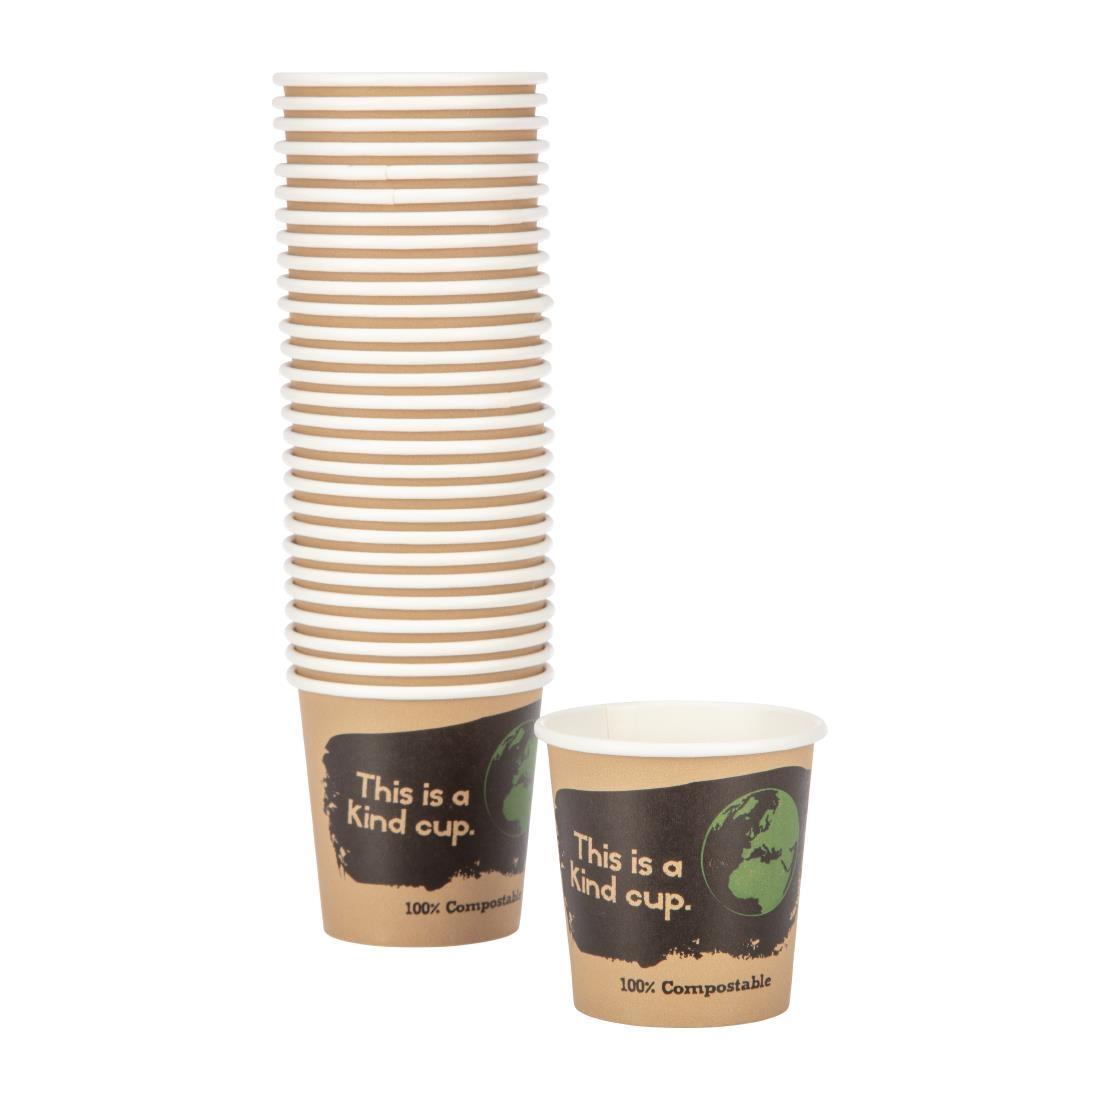 Fiesta Compostable Espresso Cups Single Wall 113ml / 4oz (Pack of 1000) - DY981  - 4